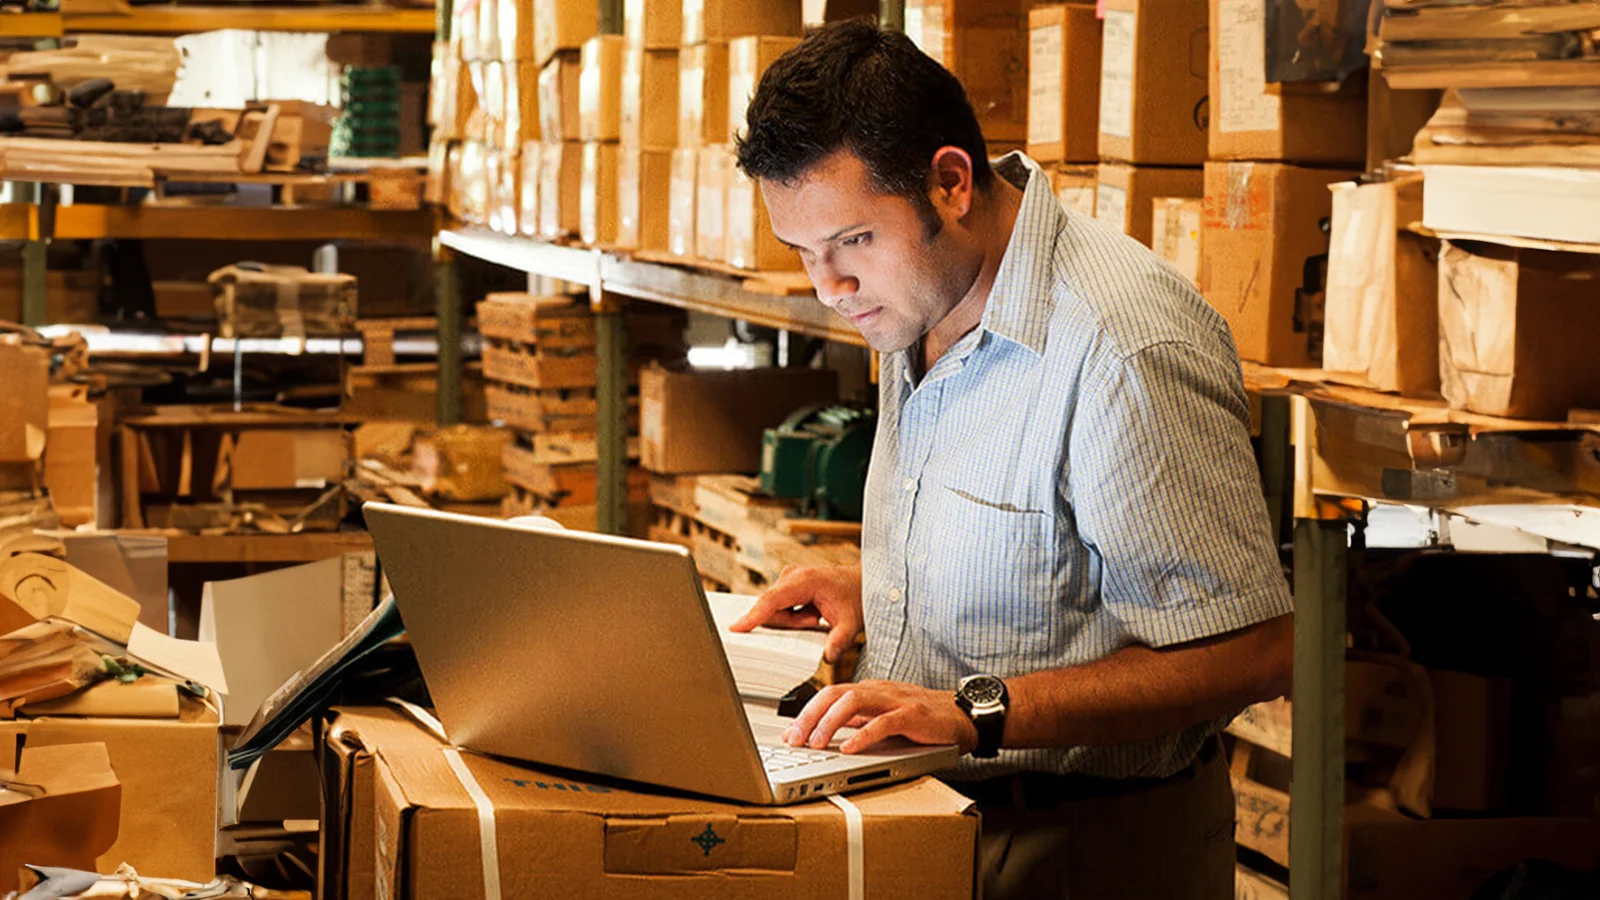 Hispanic manager working on his laptop in the warehouse